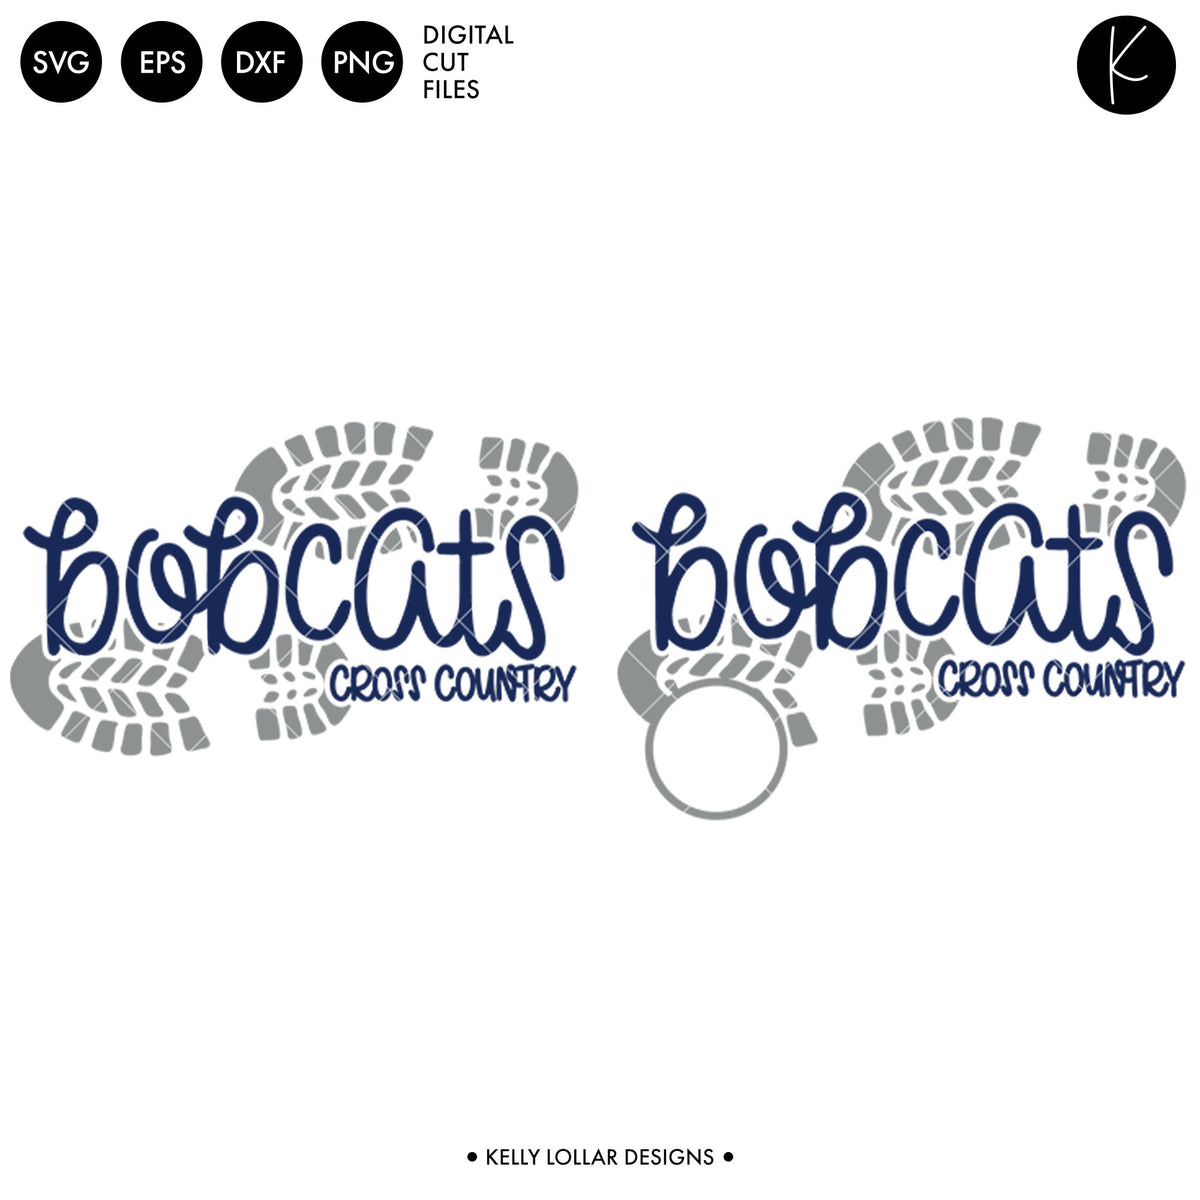 Bobcats Cross Country Bundle | SVG DXF EPS PNG Cut Files